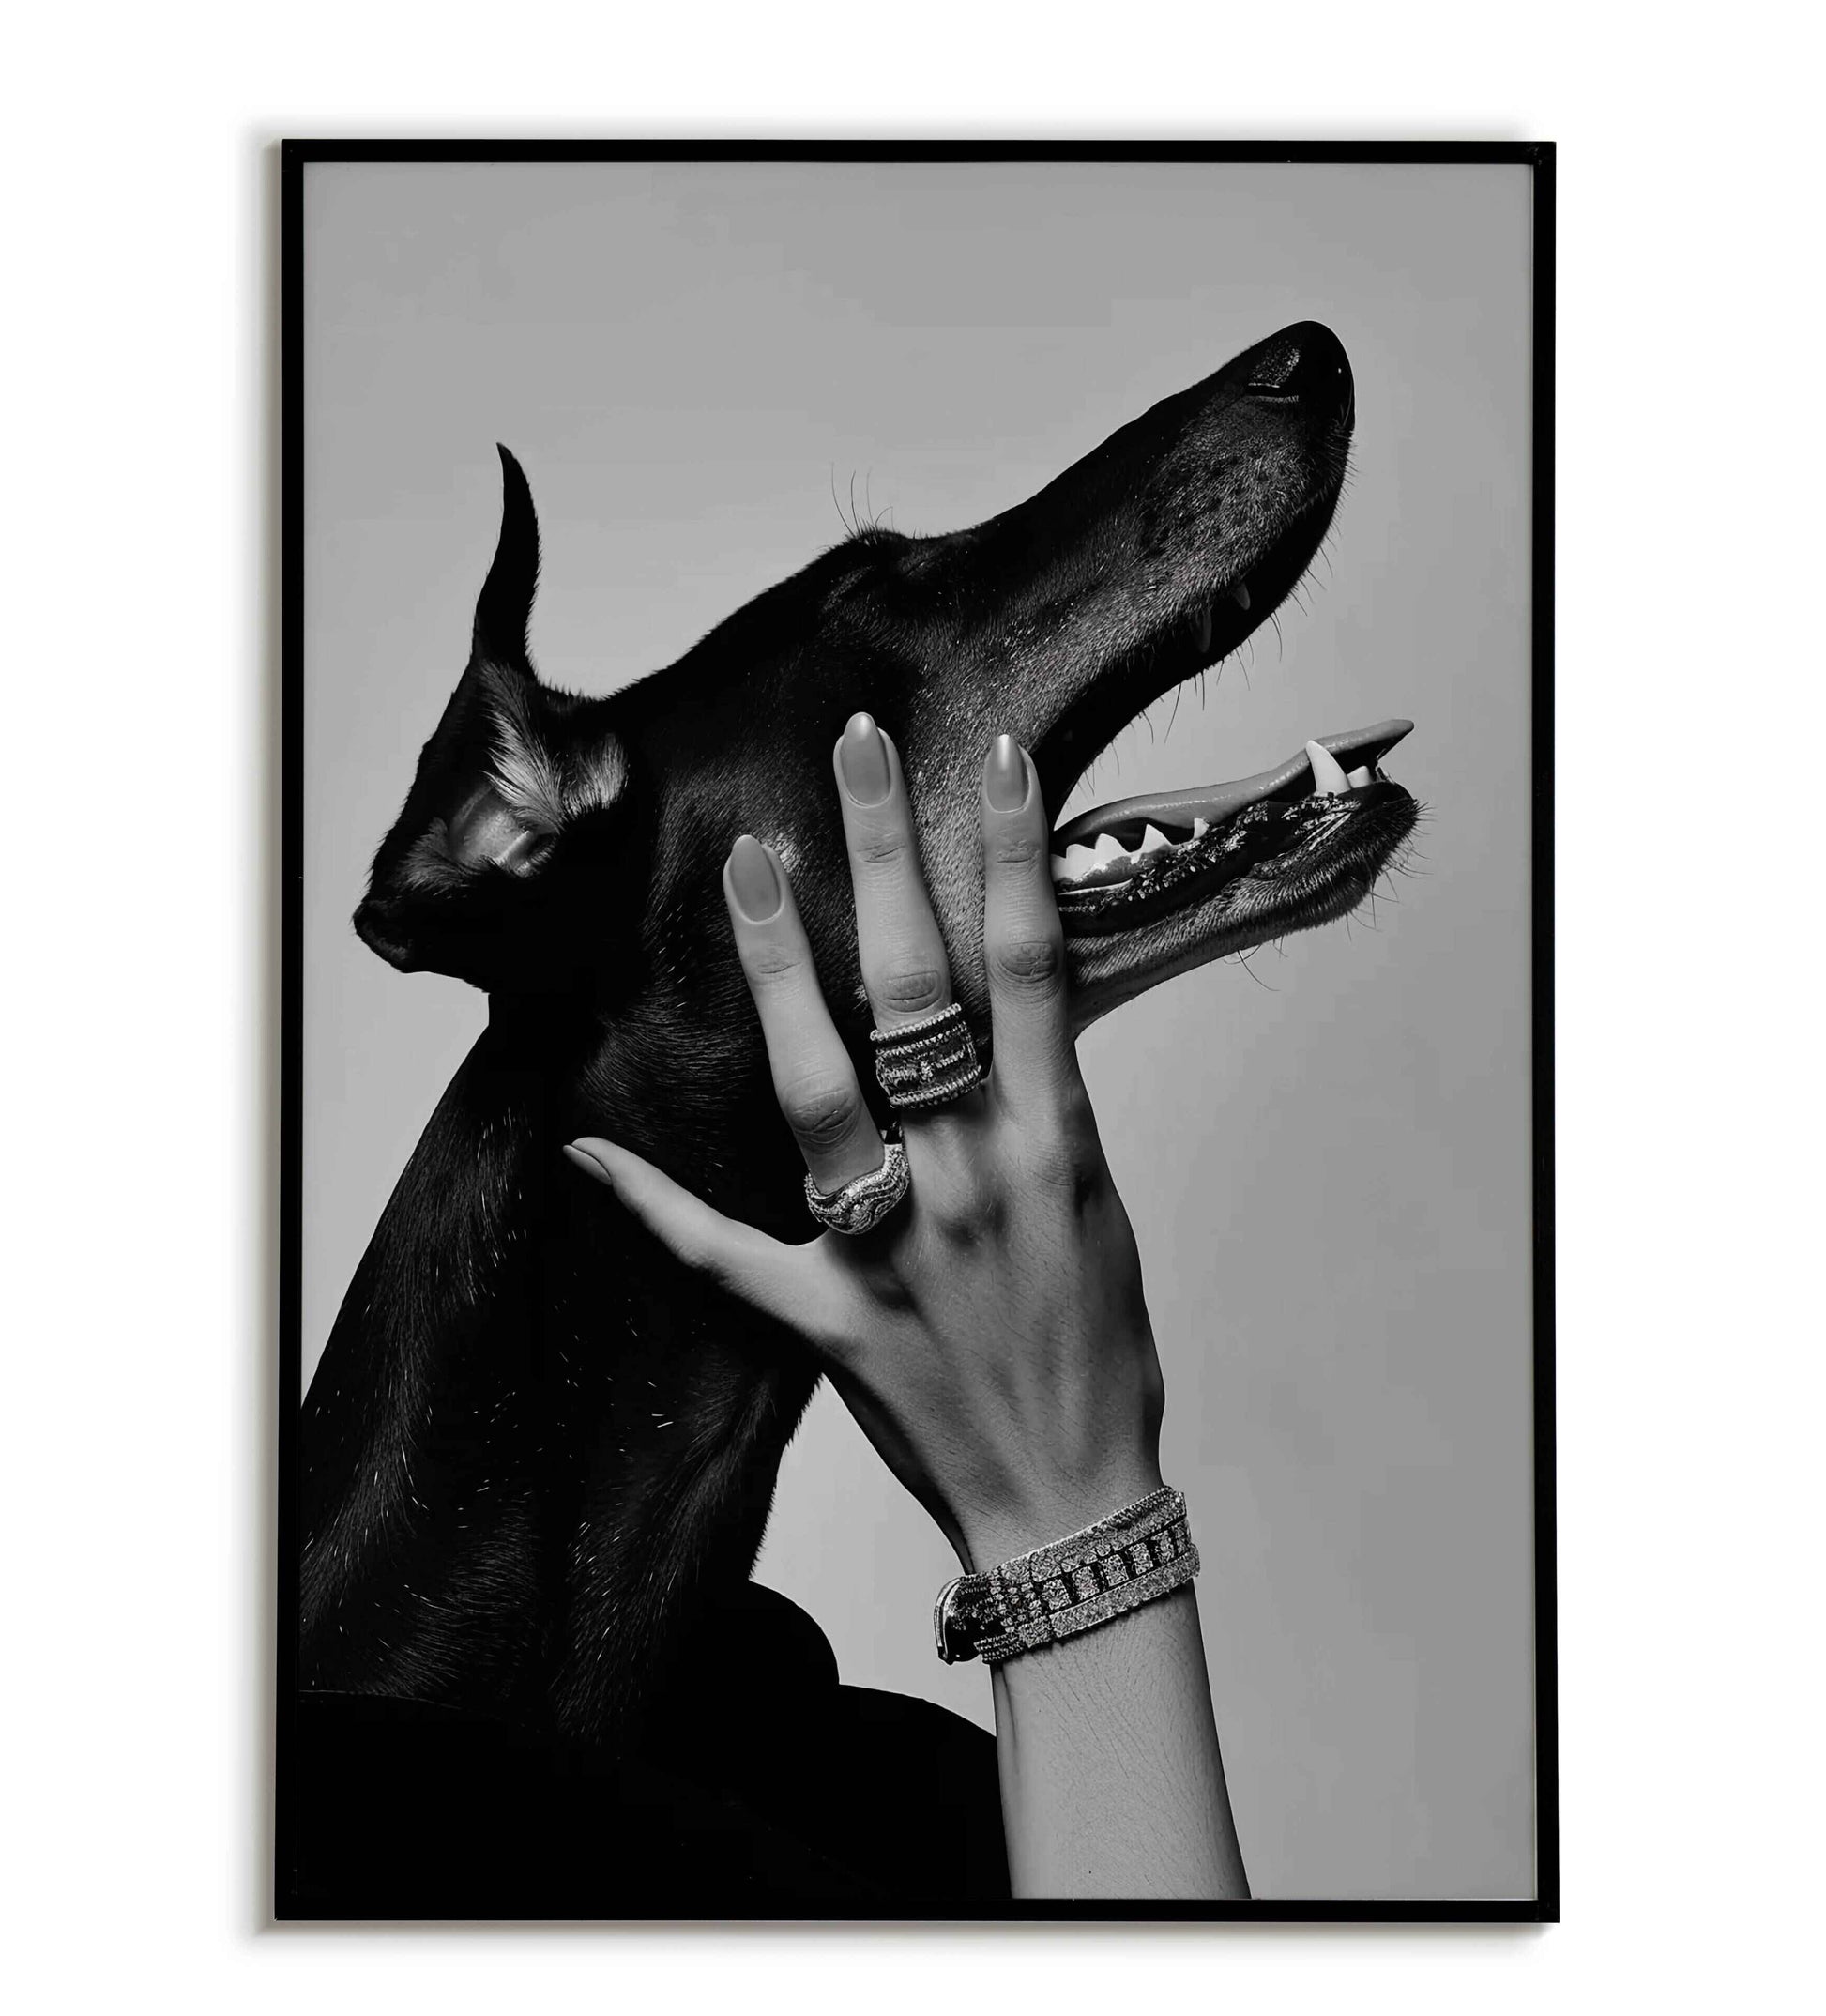 Dog and Diamonds(1 of 2) printable poster. Available for purchase as a physical poster or digital download.